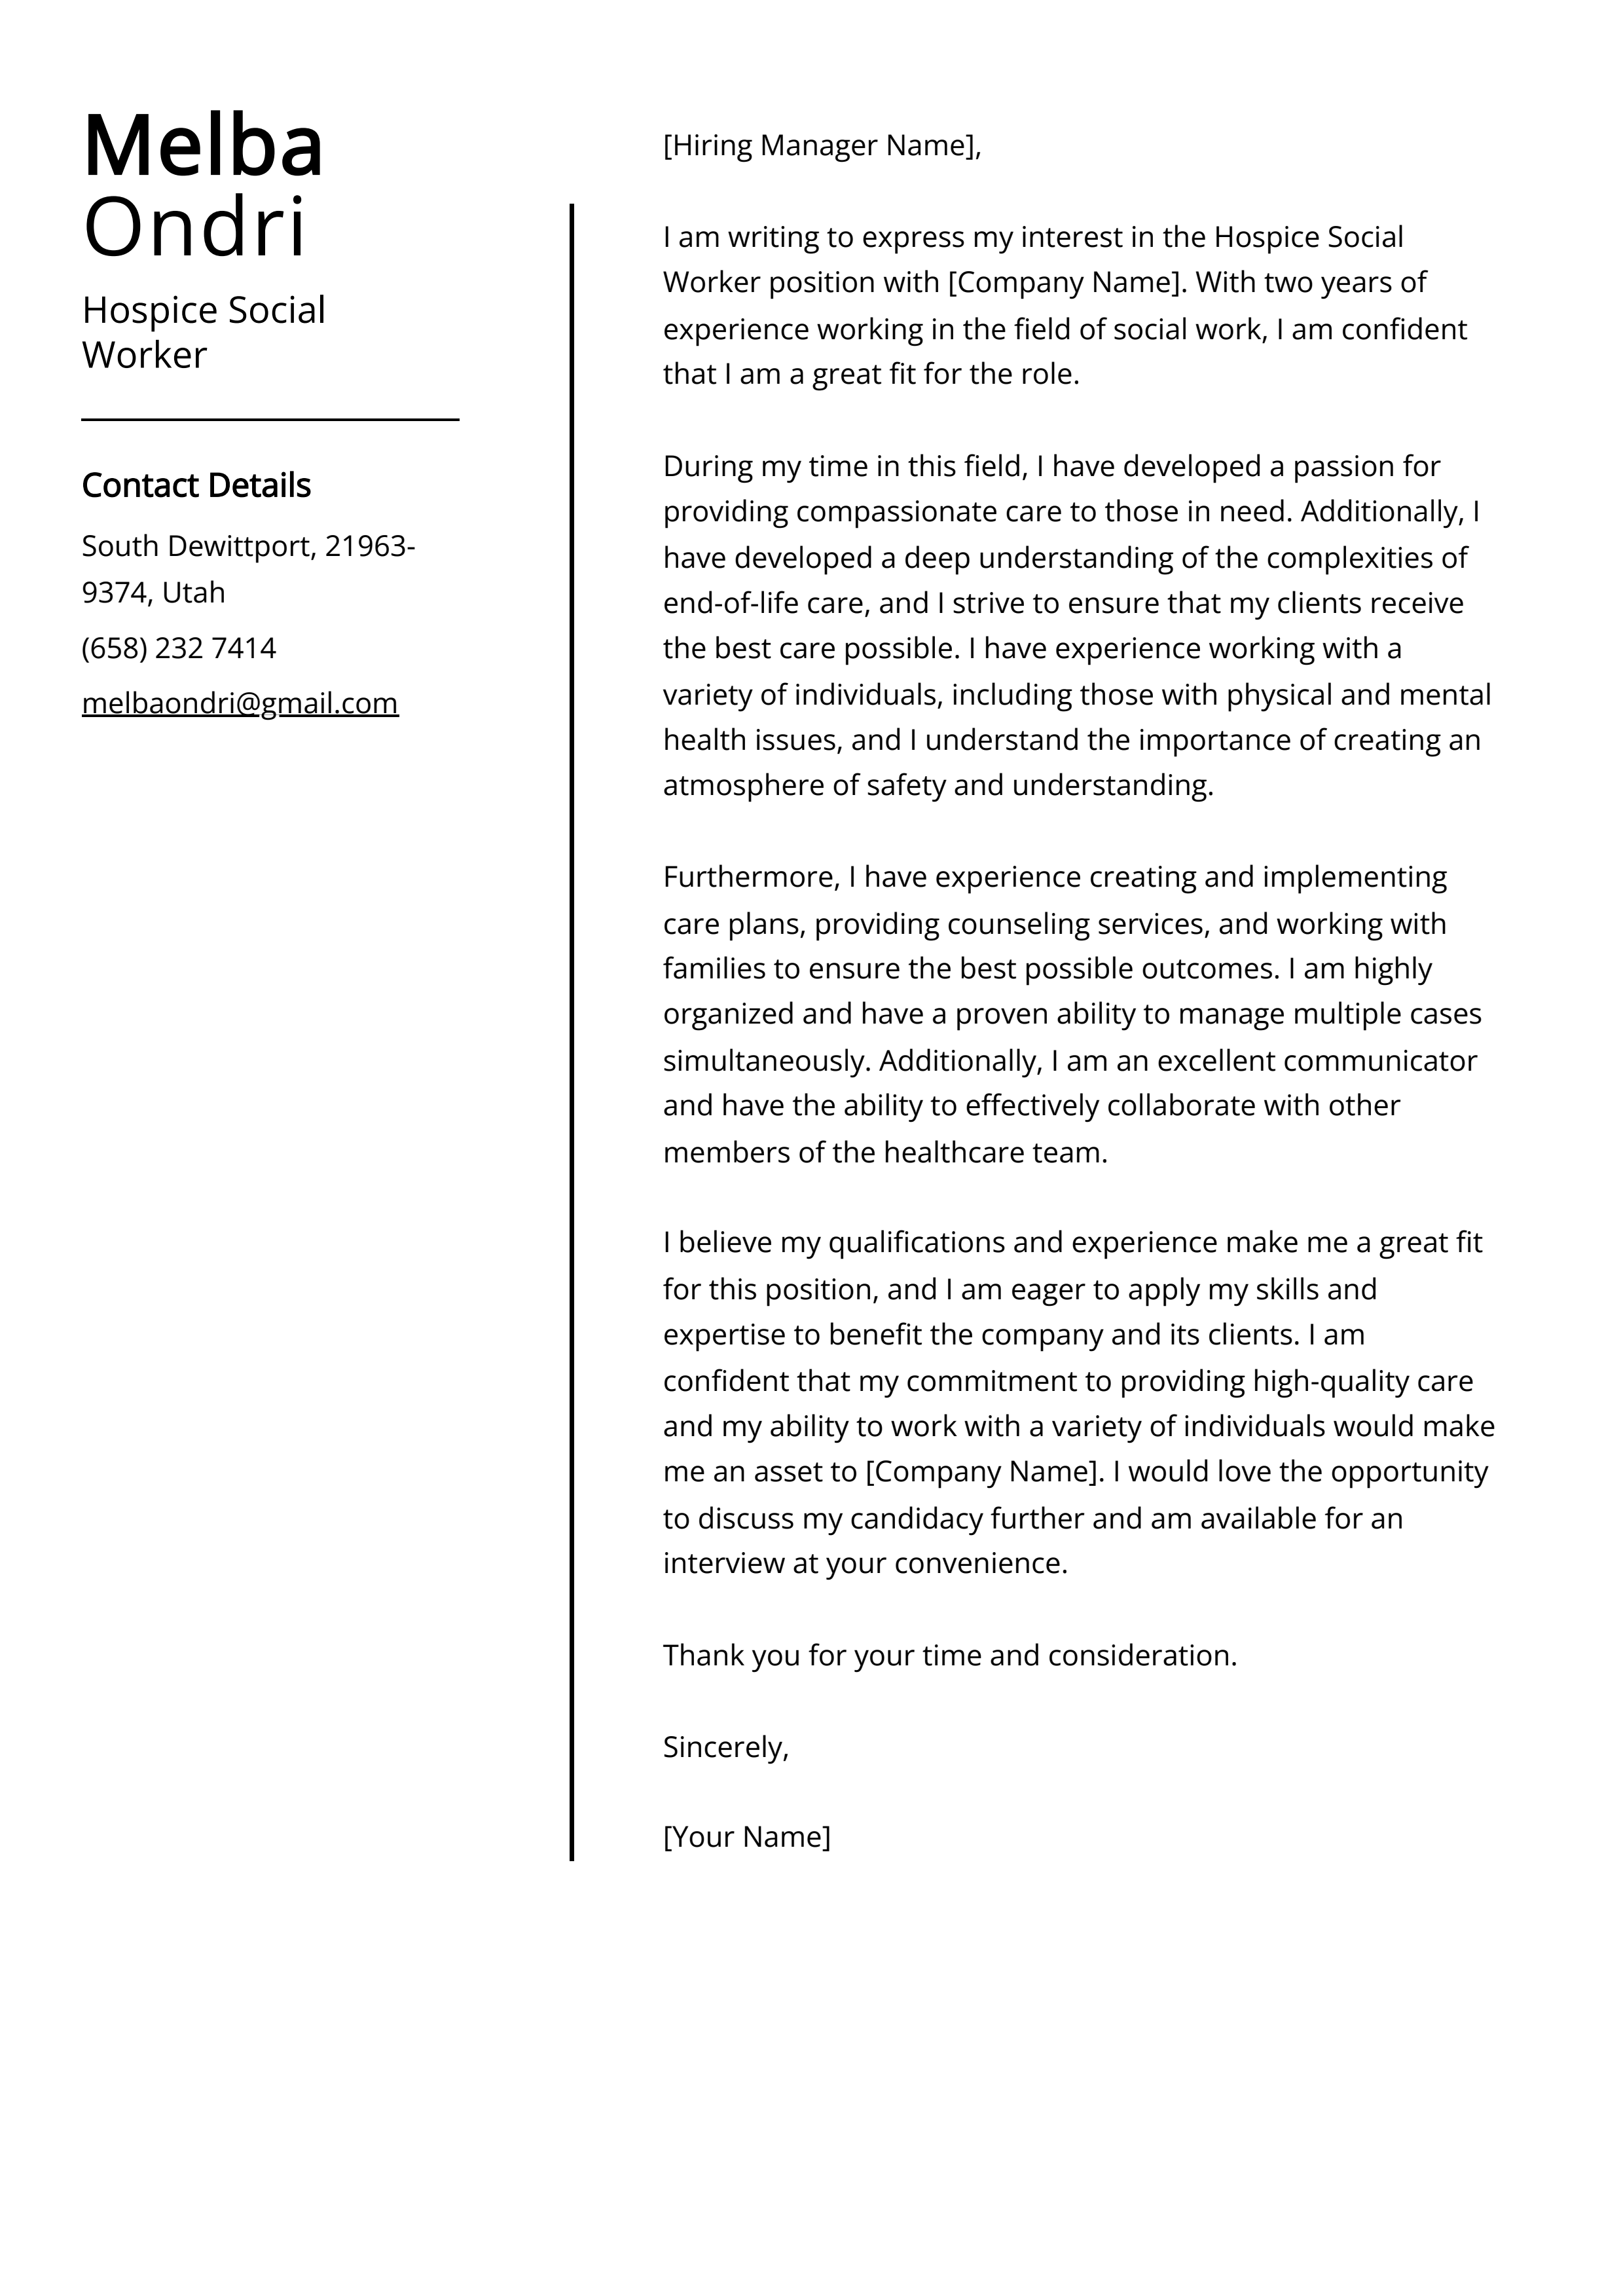 Hospice Social Worker Cover Letter Example